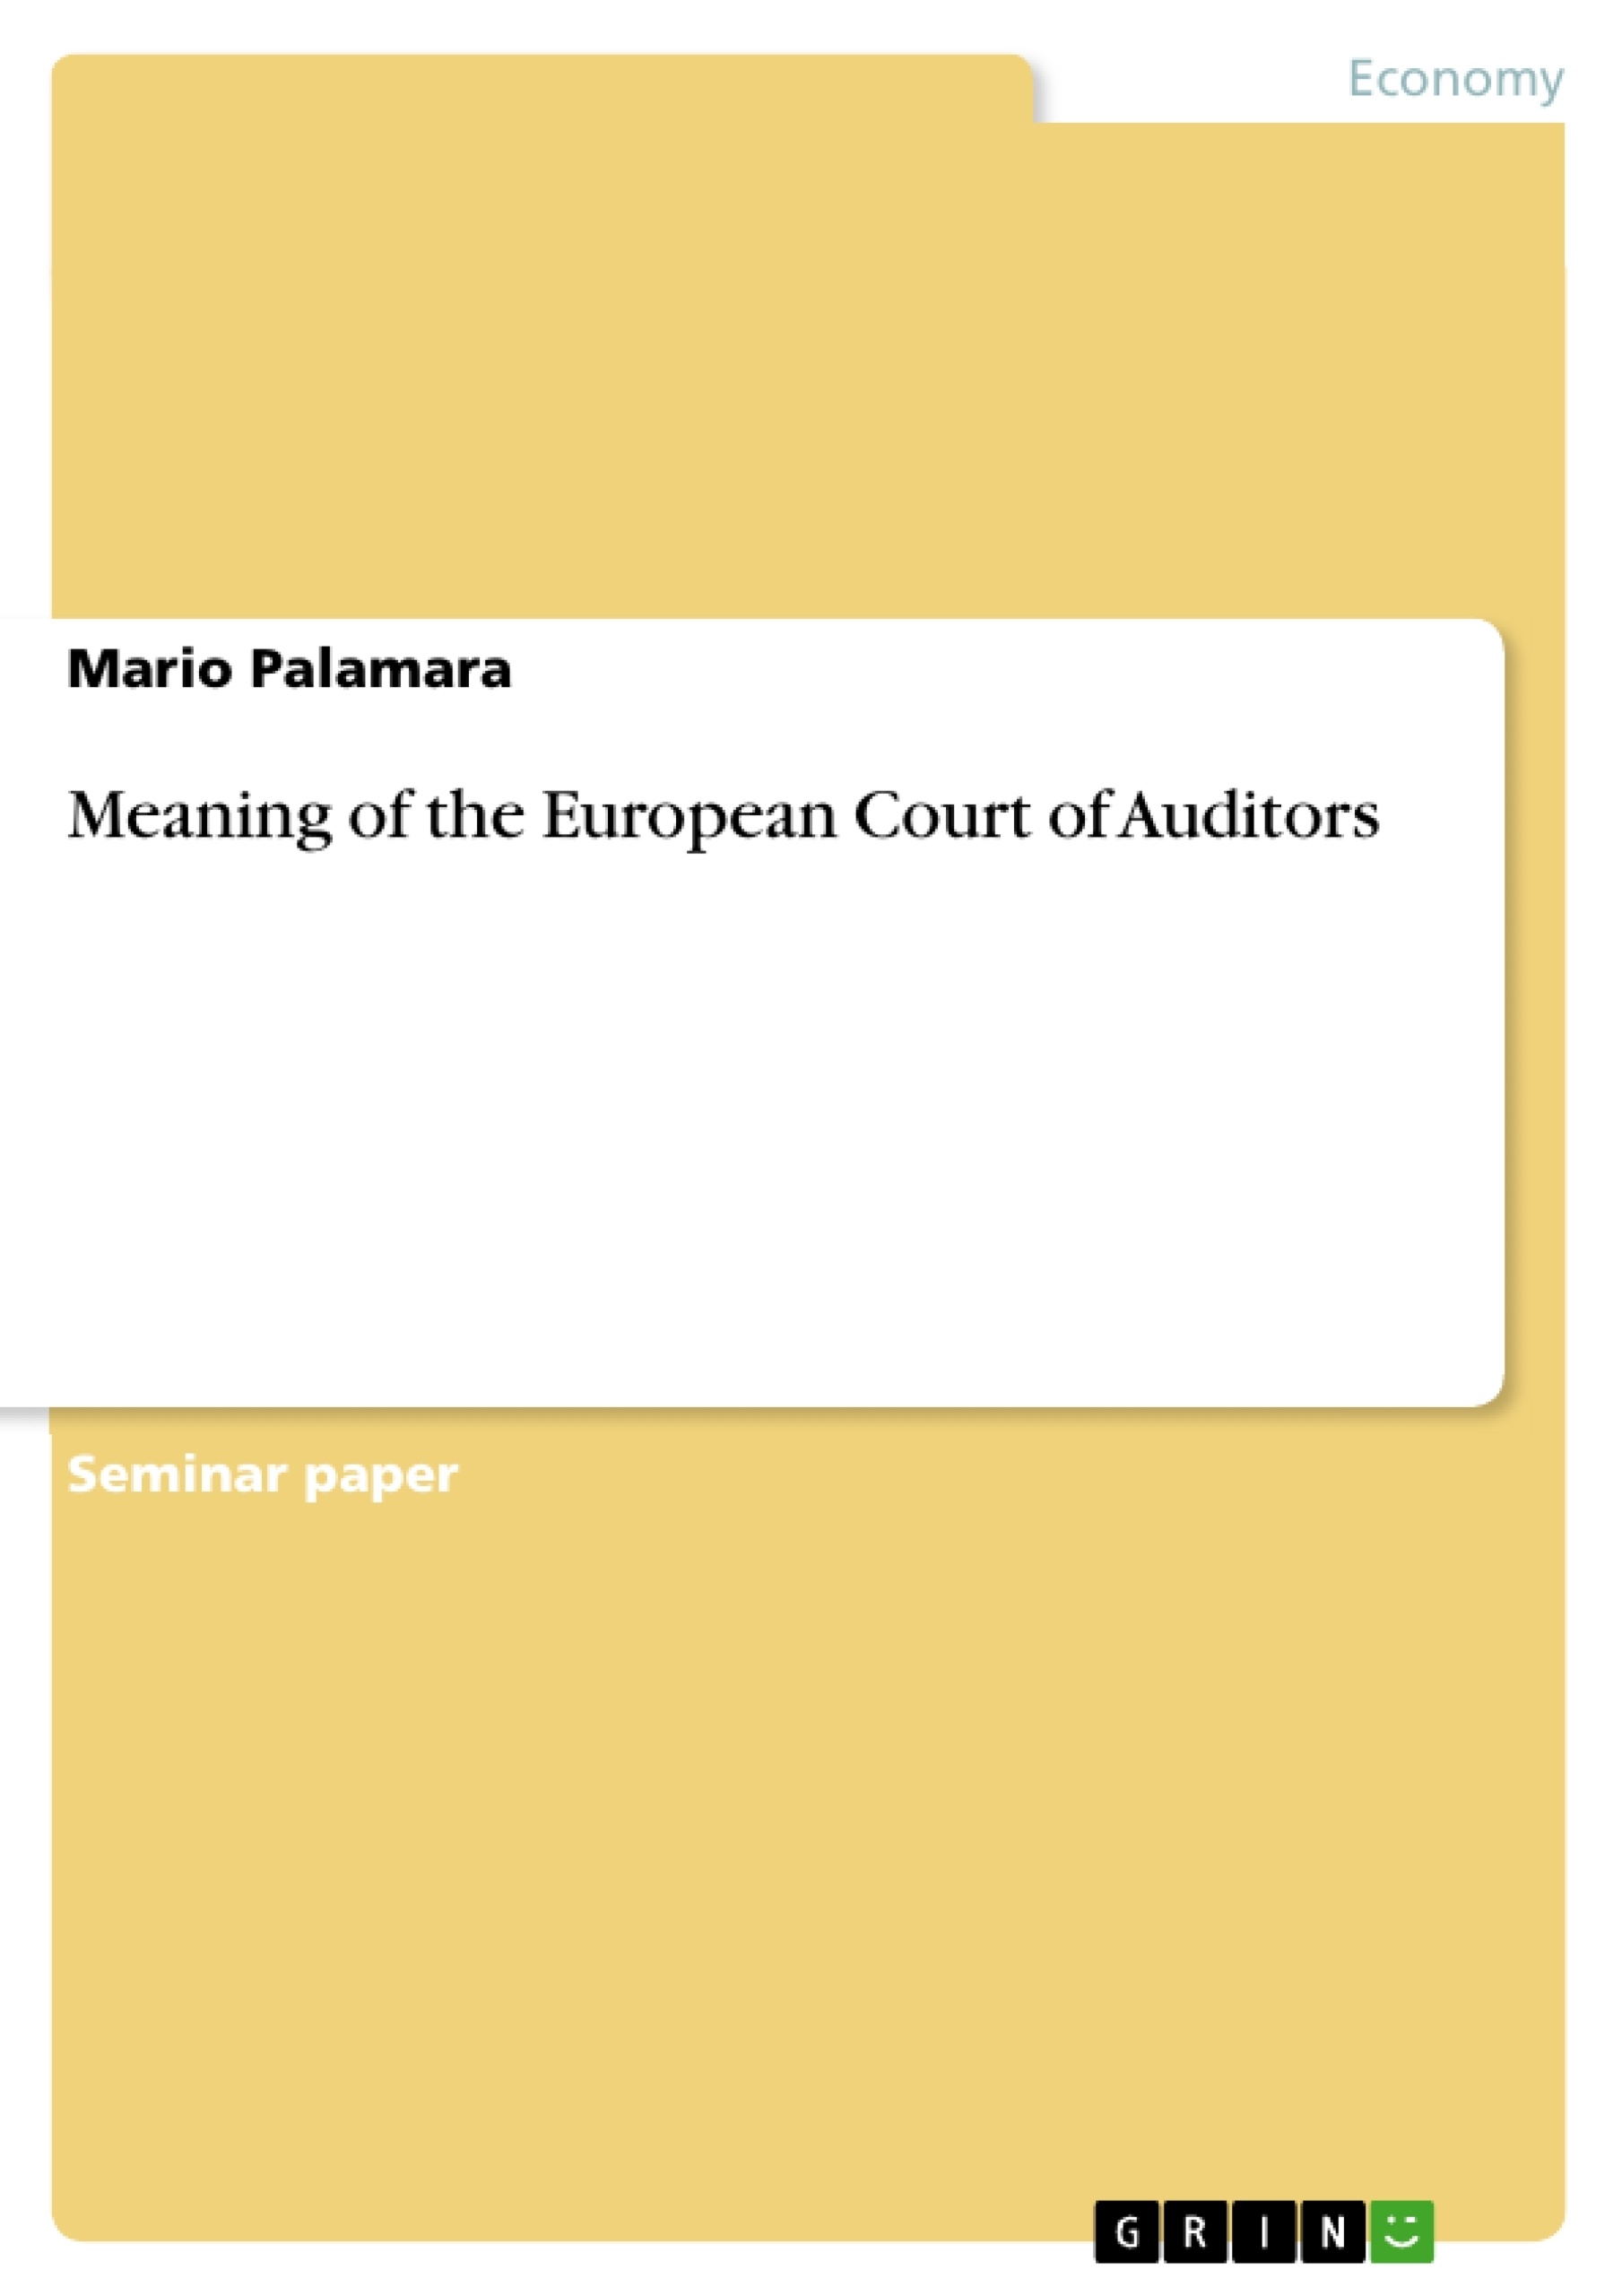 Título: Meaning of the European Court of Auditors